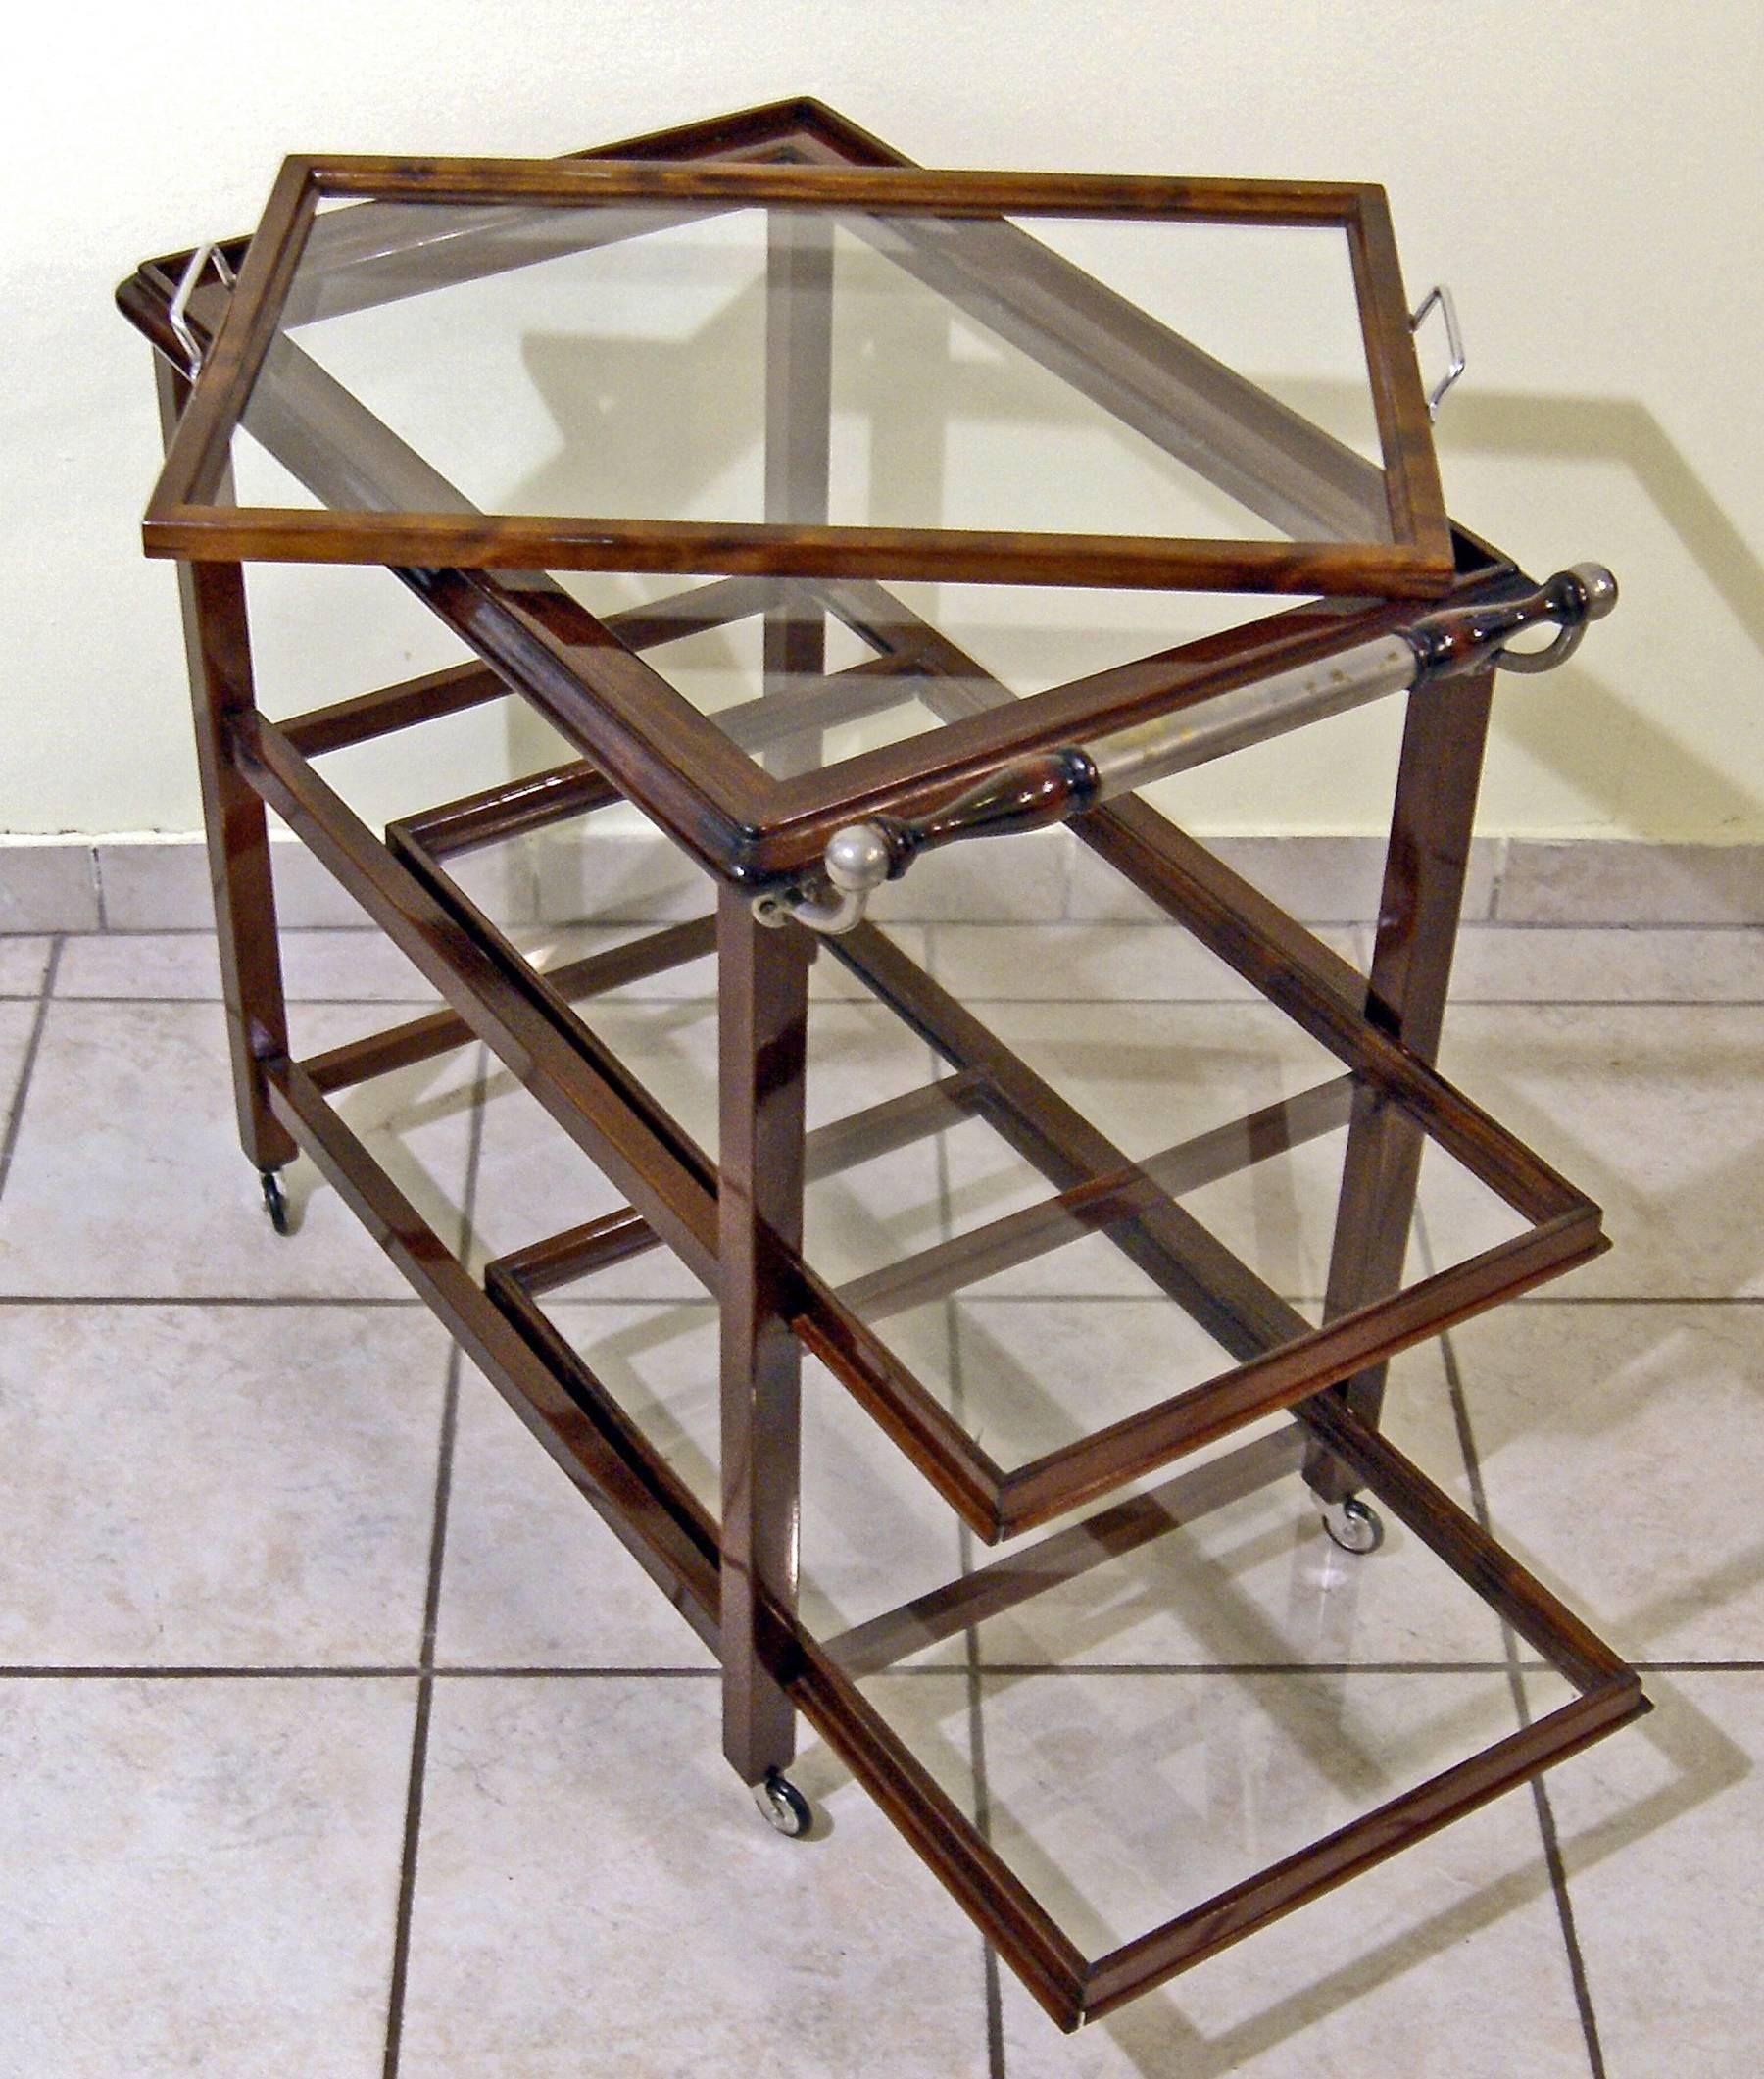 Early 20th Century Art Nouveau Vienna Serving Trolley Nutwood, circa 1915